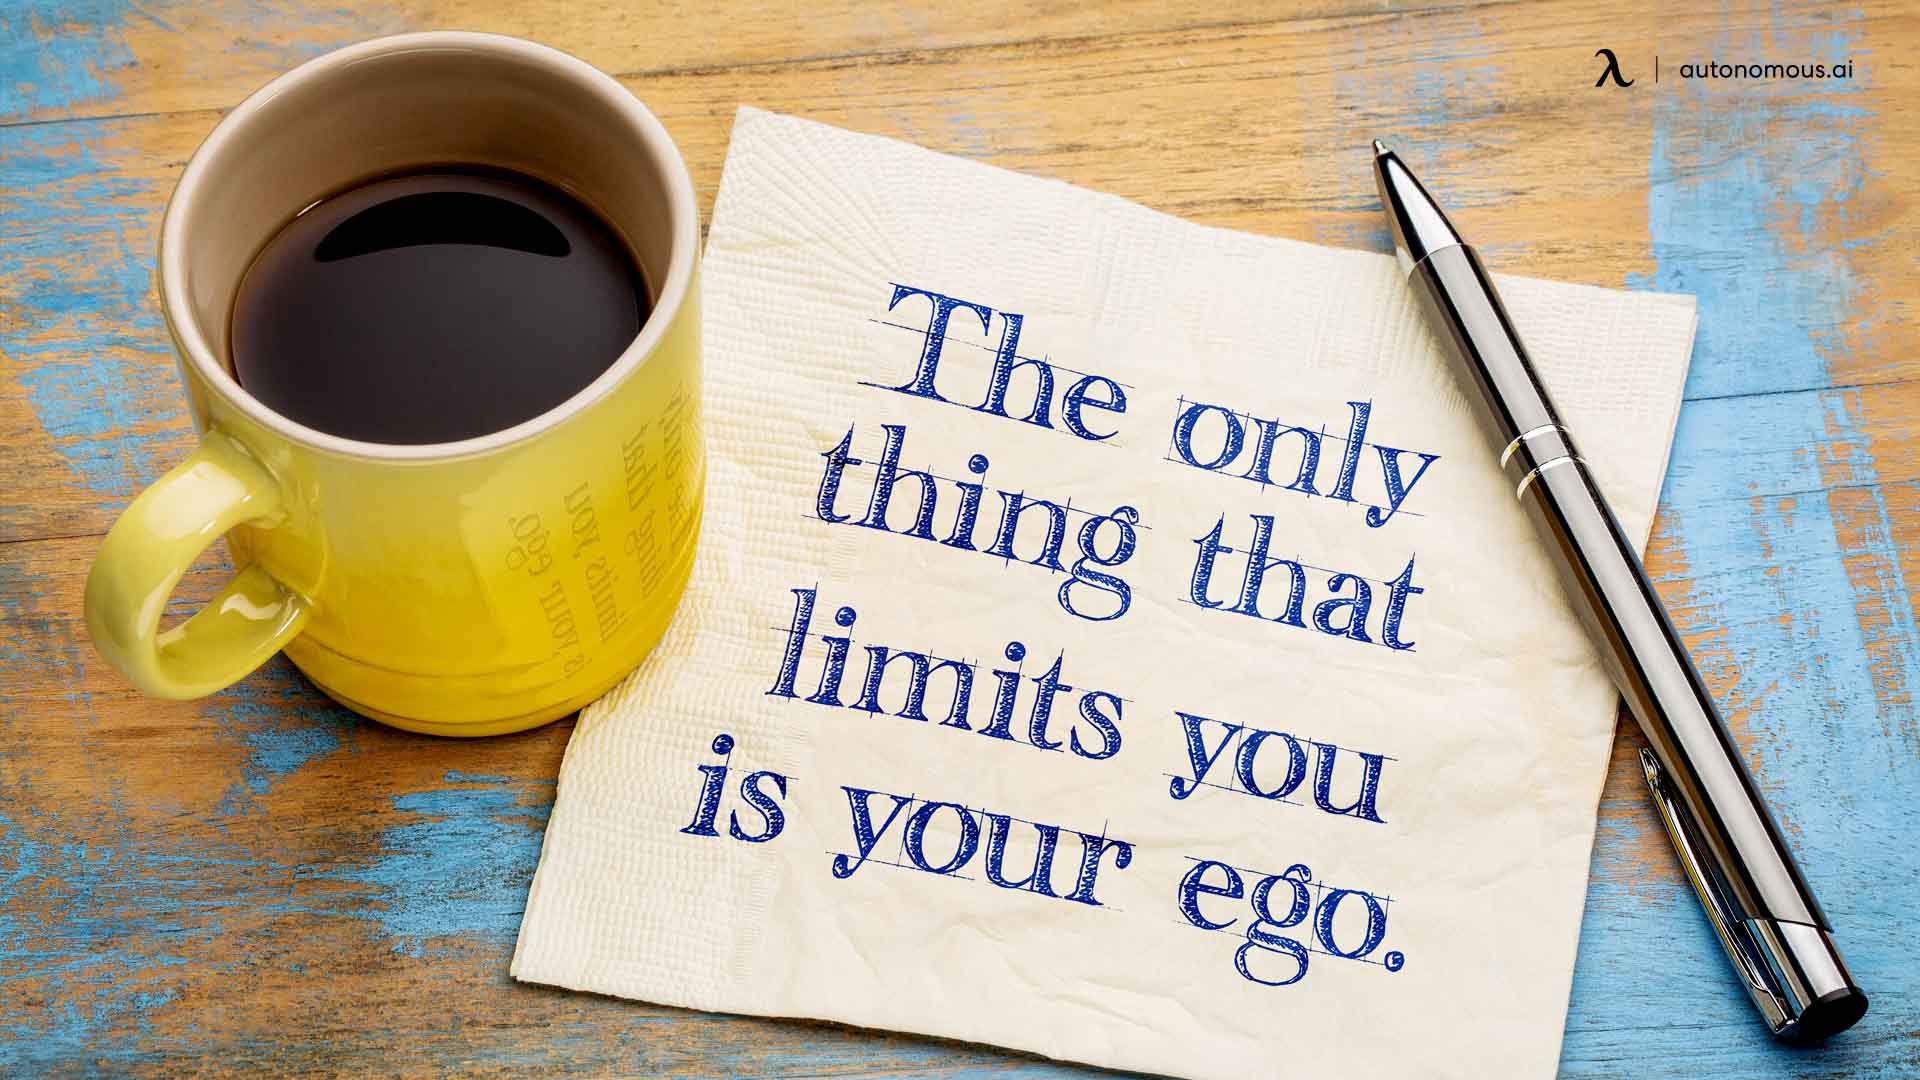 let go of your ego